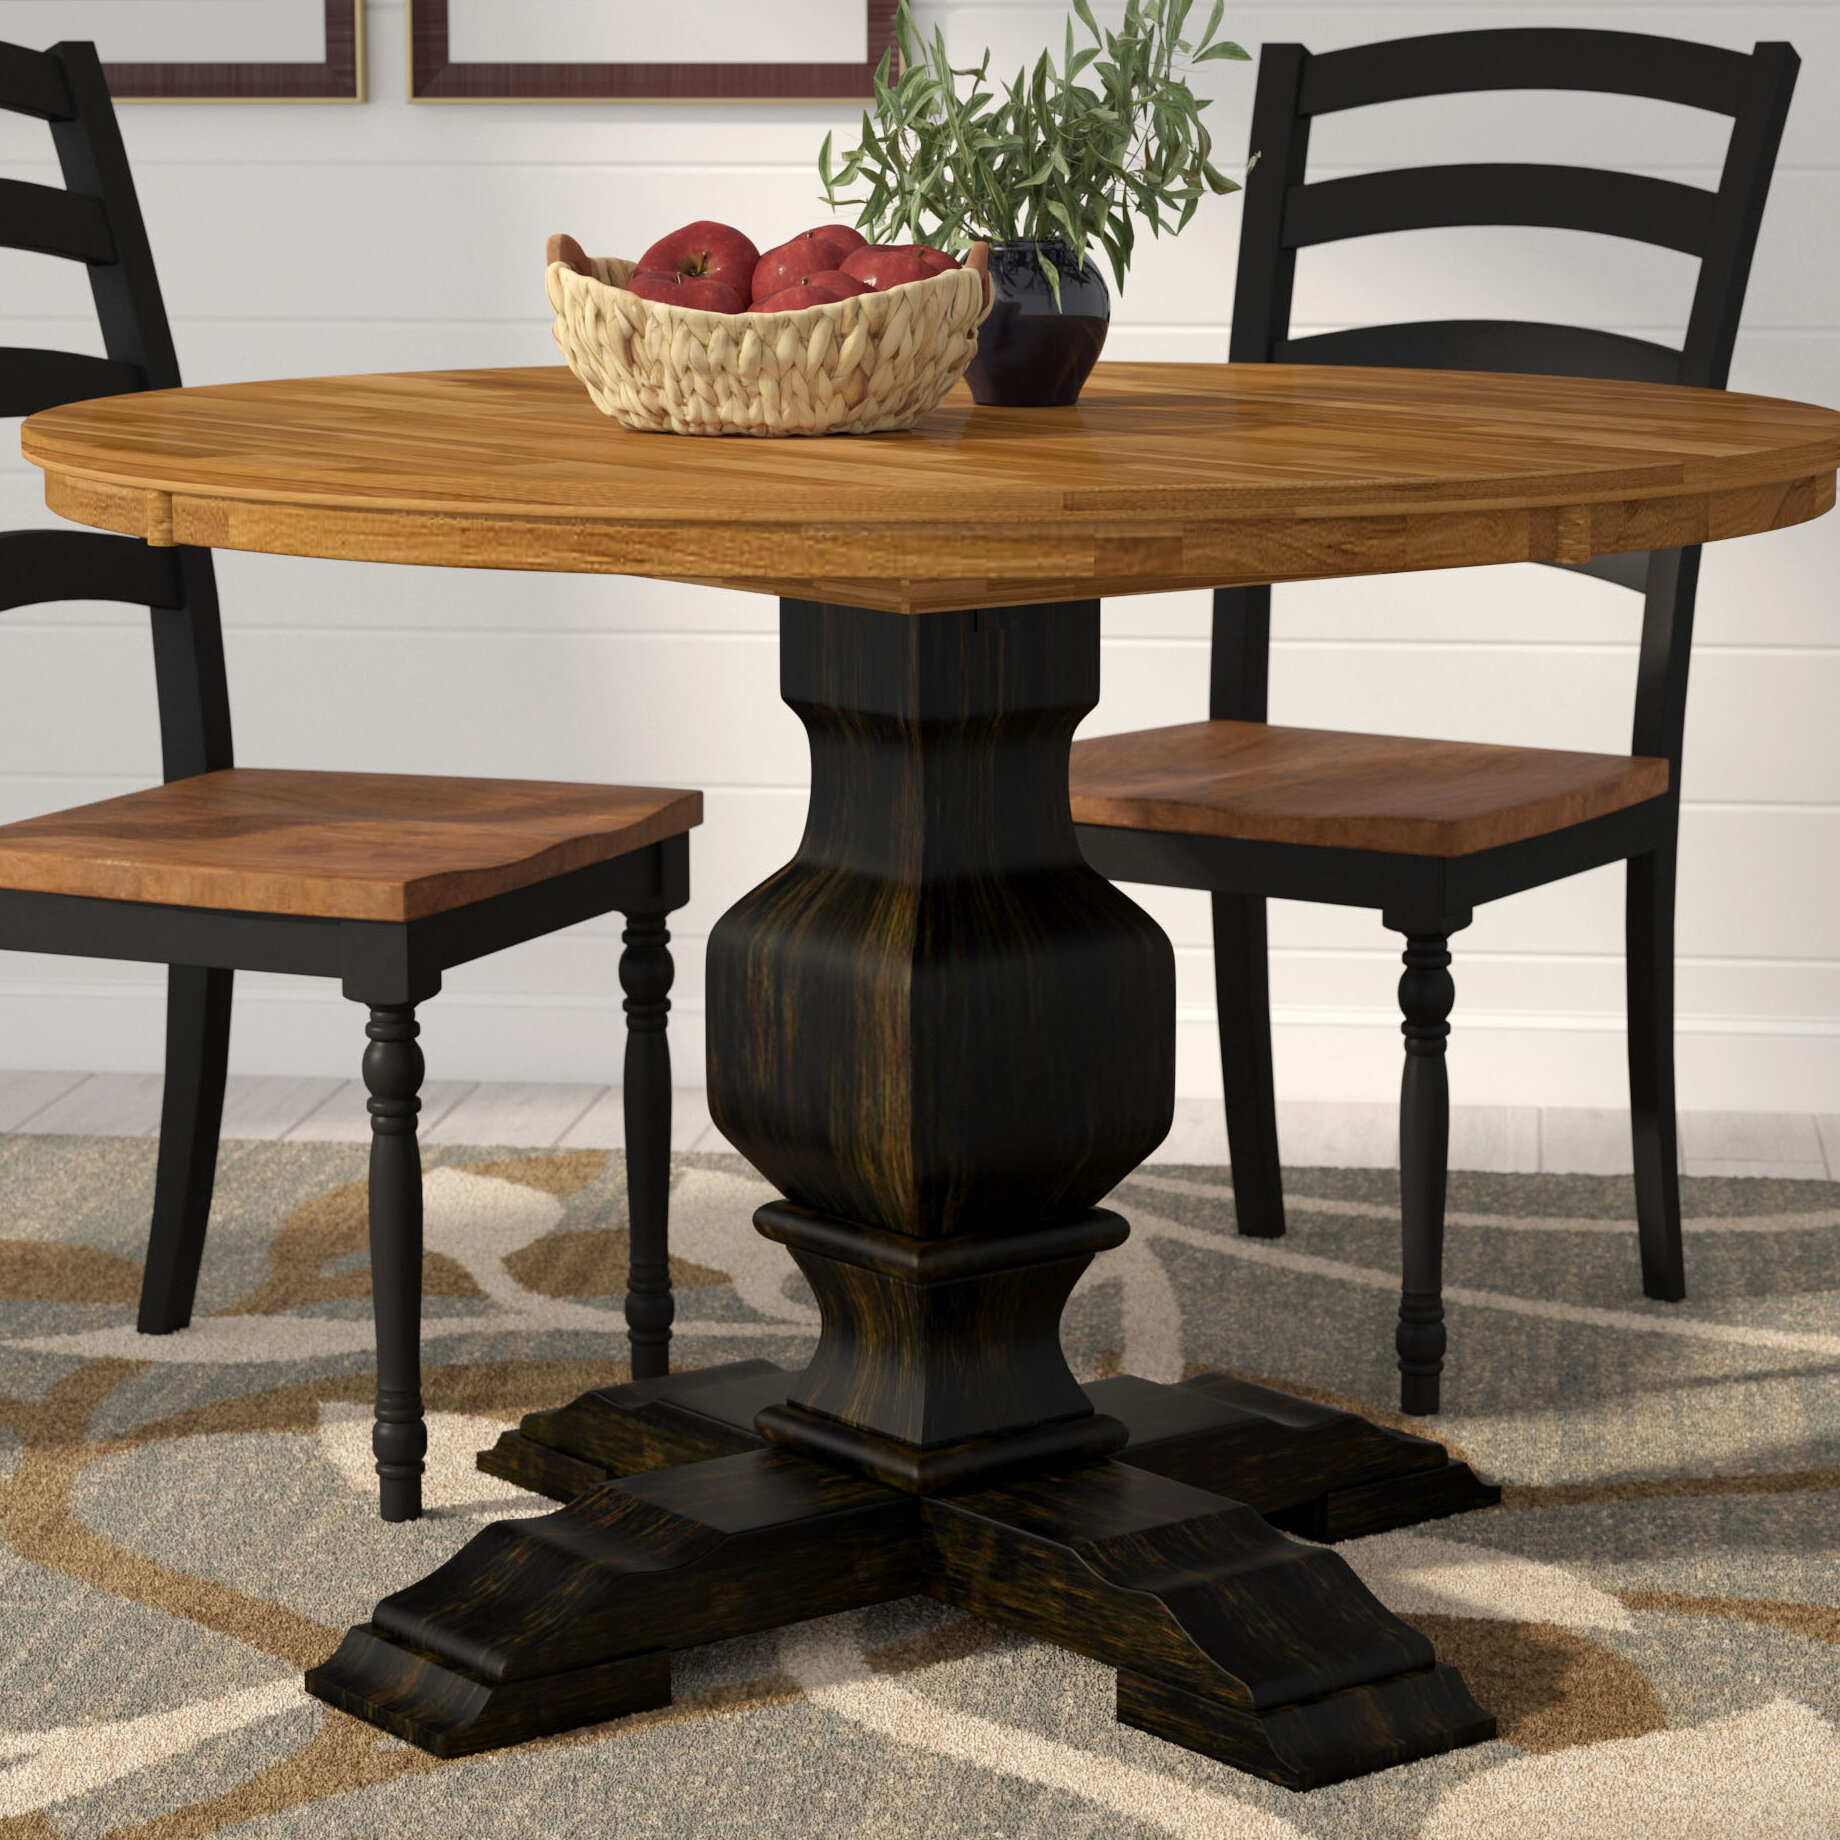 48 Inch Round Dining Table You Ll Love, 48 Inch Round Pedestal Dining Table Set